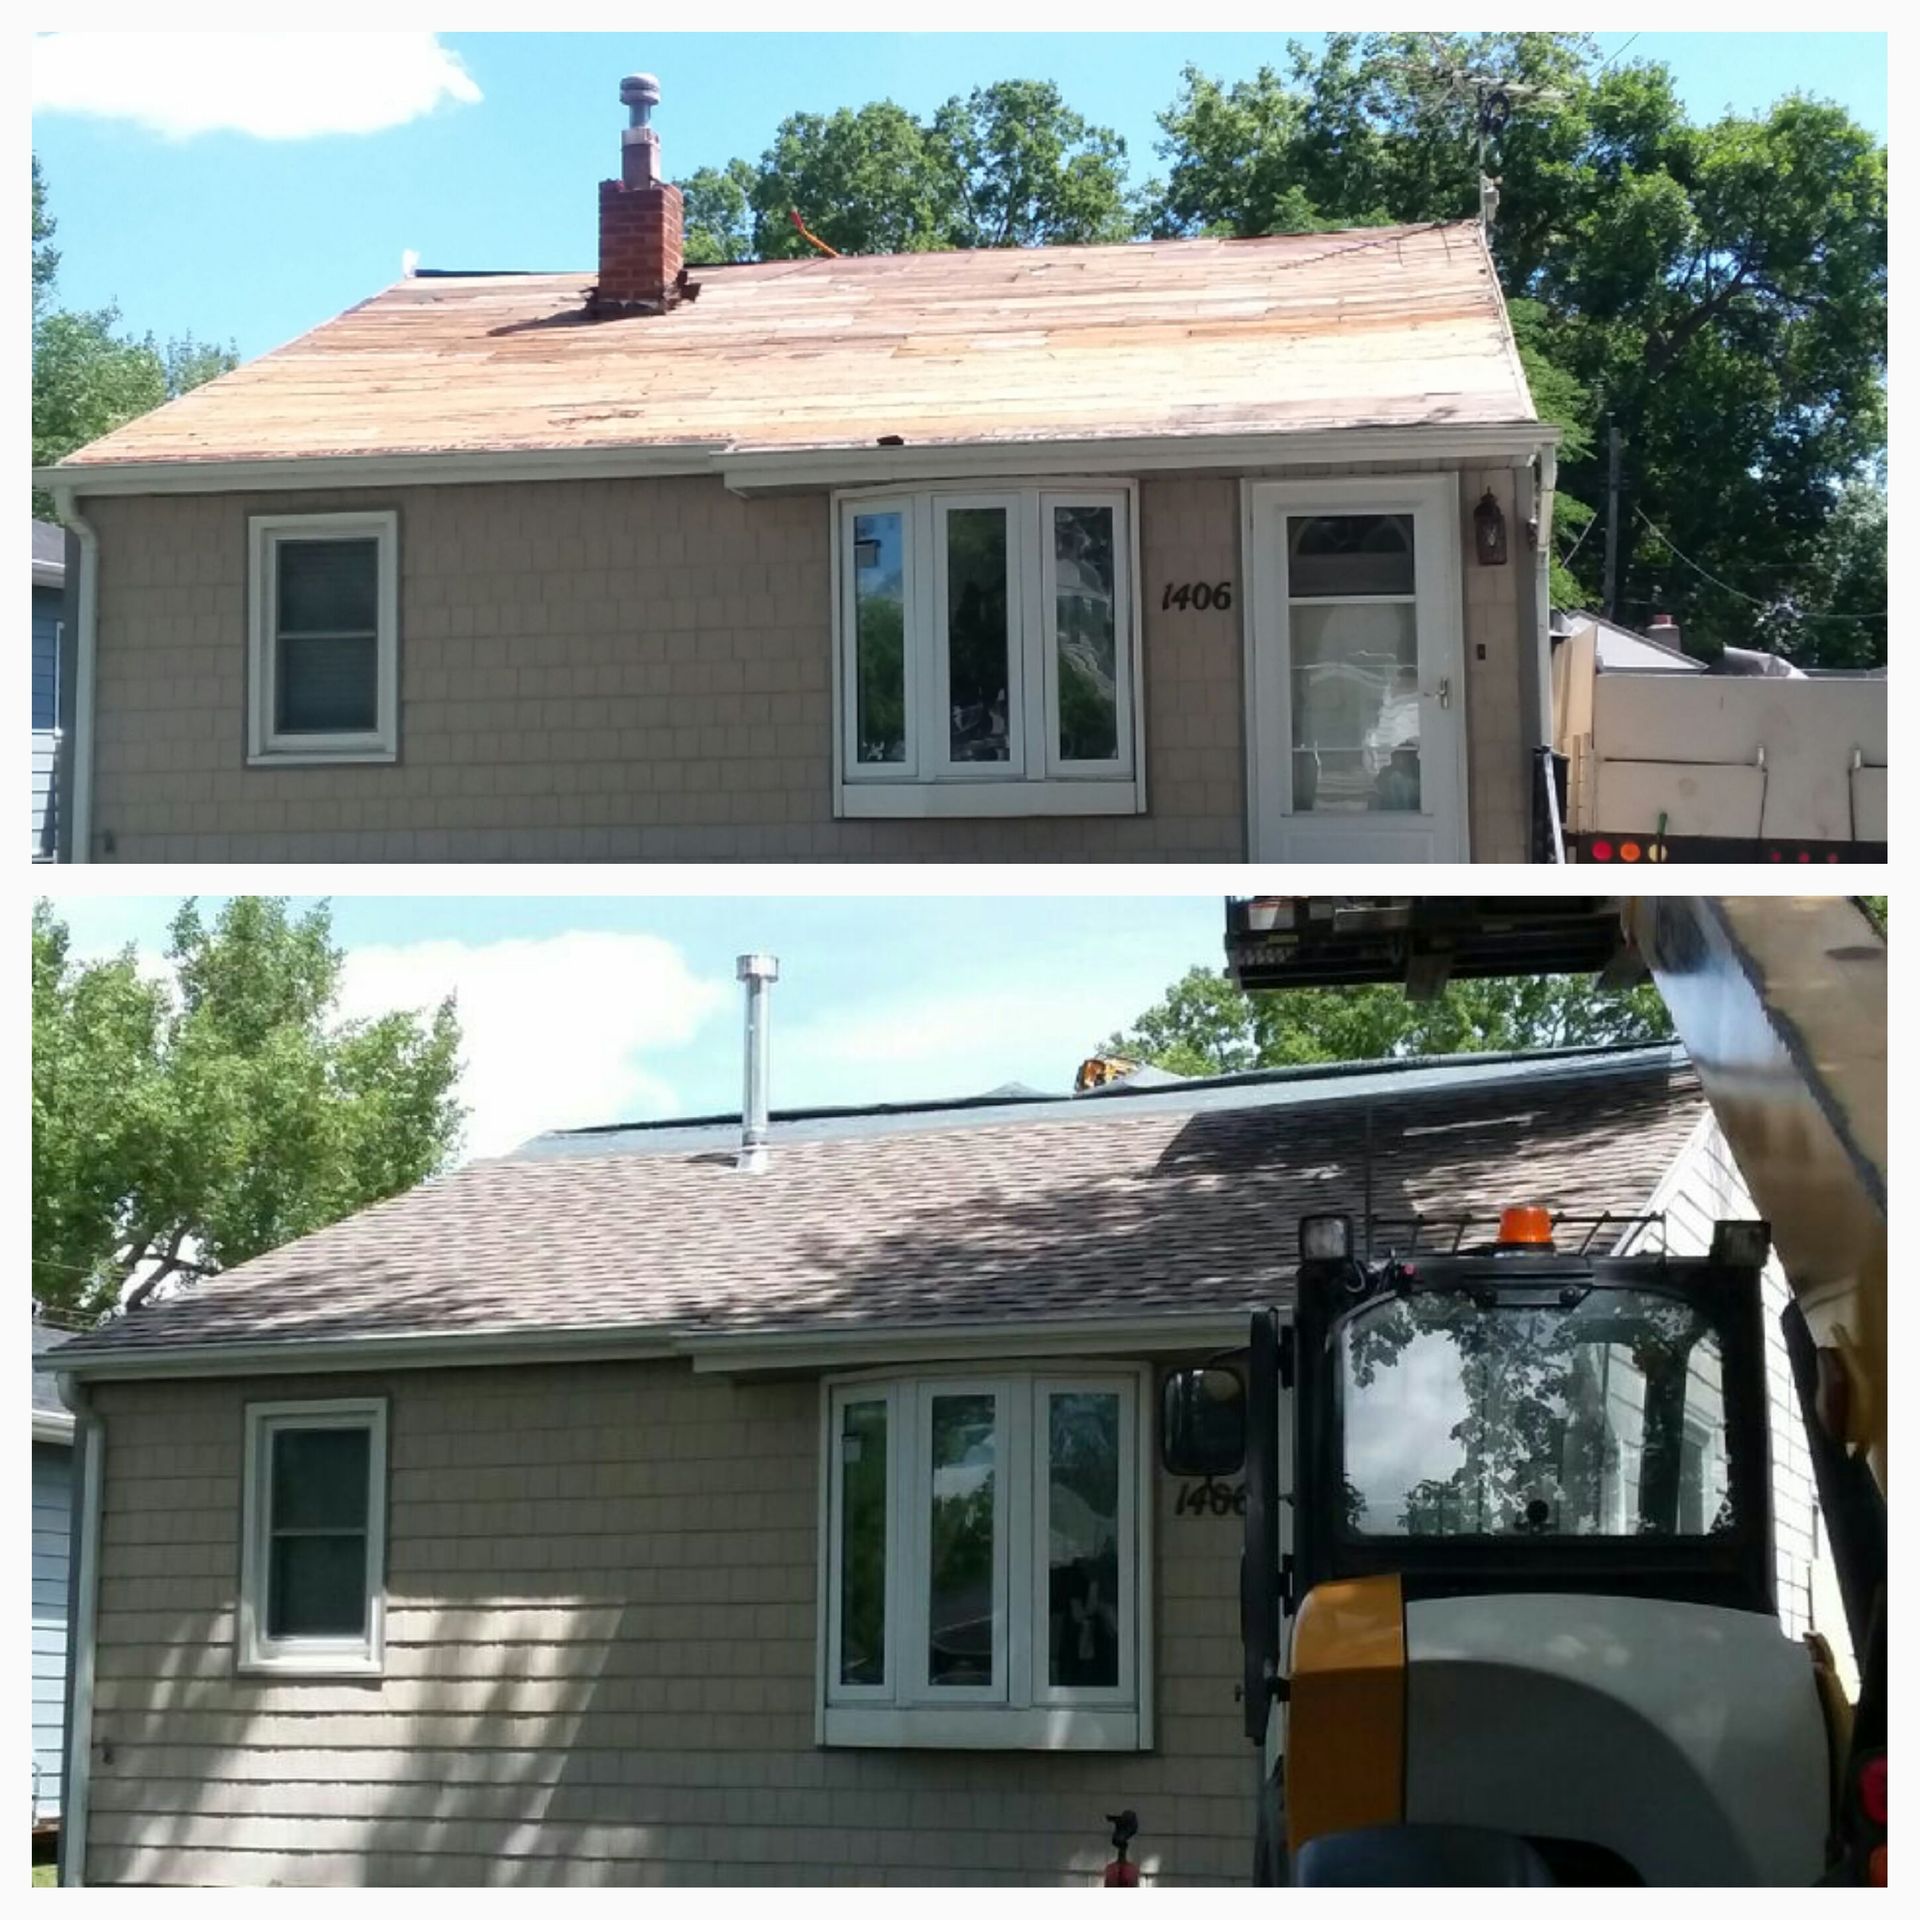 Roof Chimney Removed and Northgate Weathered Wood Colored Shingle Installed in Valley City, ND